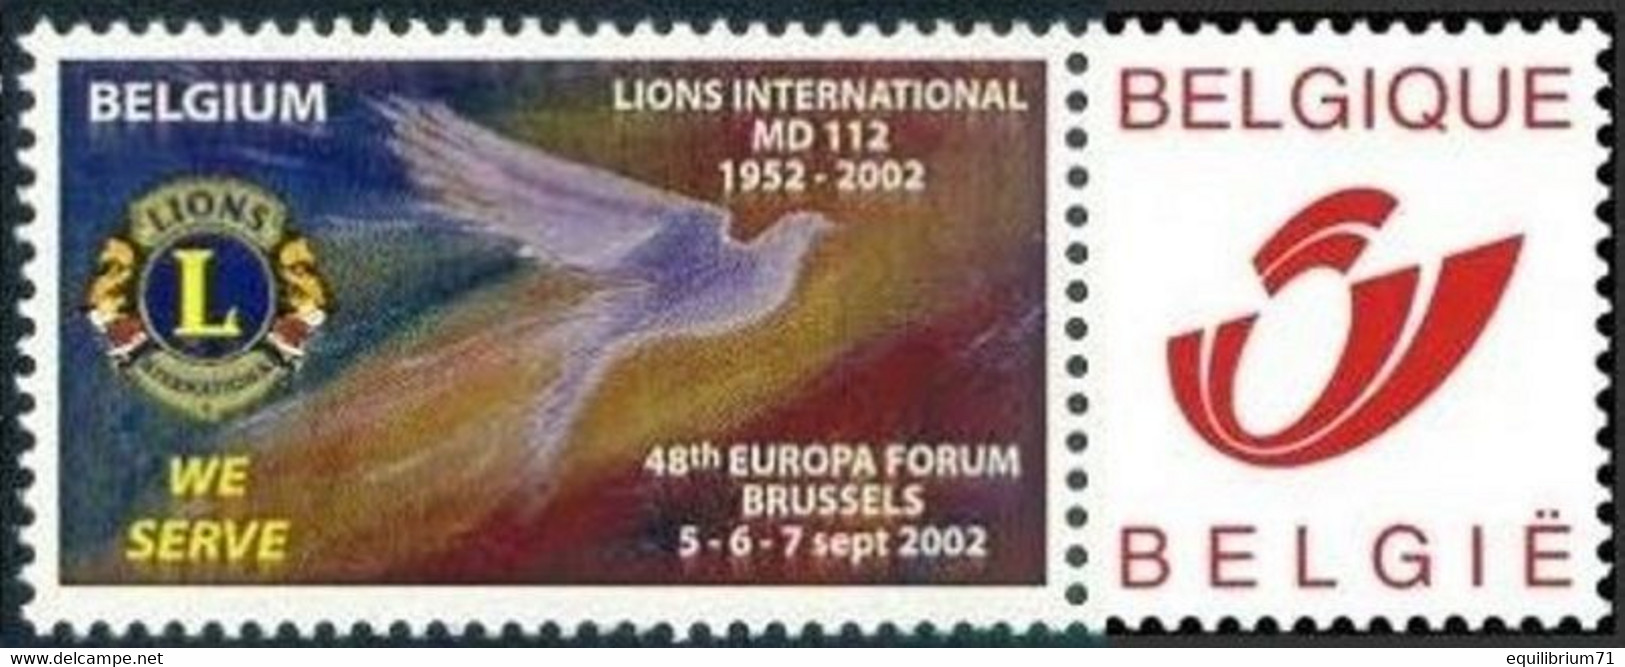 DUOSTAMP** / MYSTAMP** Lions Club Bruxelles - 45e Europa Forum Belgique / Lions Club Belgium - 45e Europa Forum Brussel - Mint